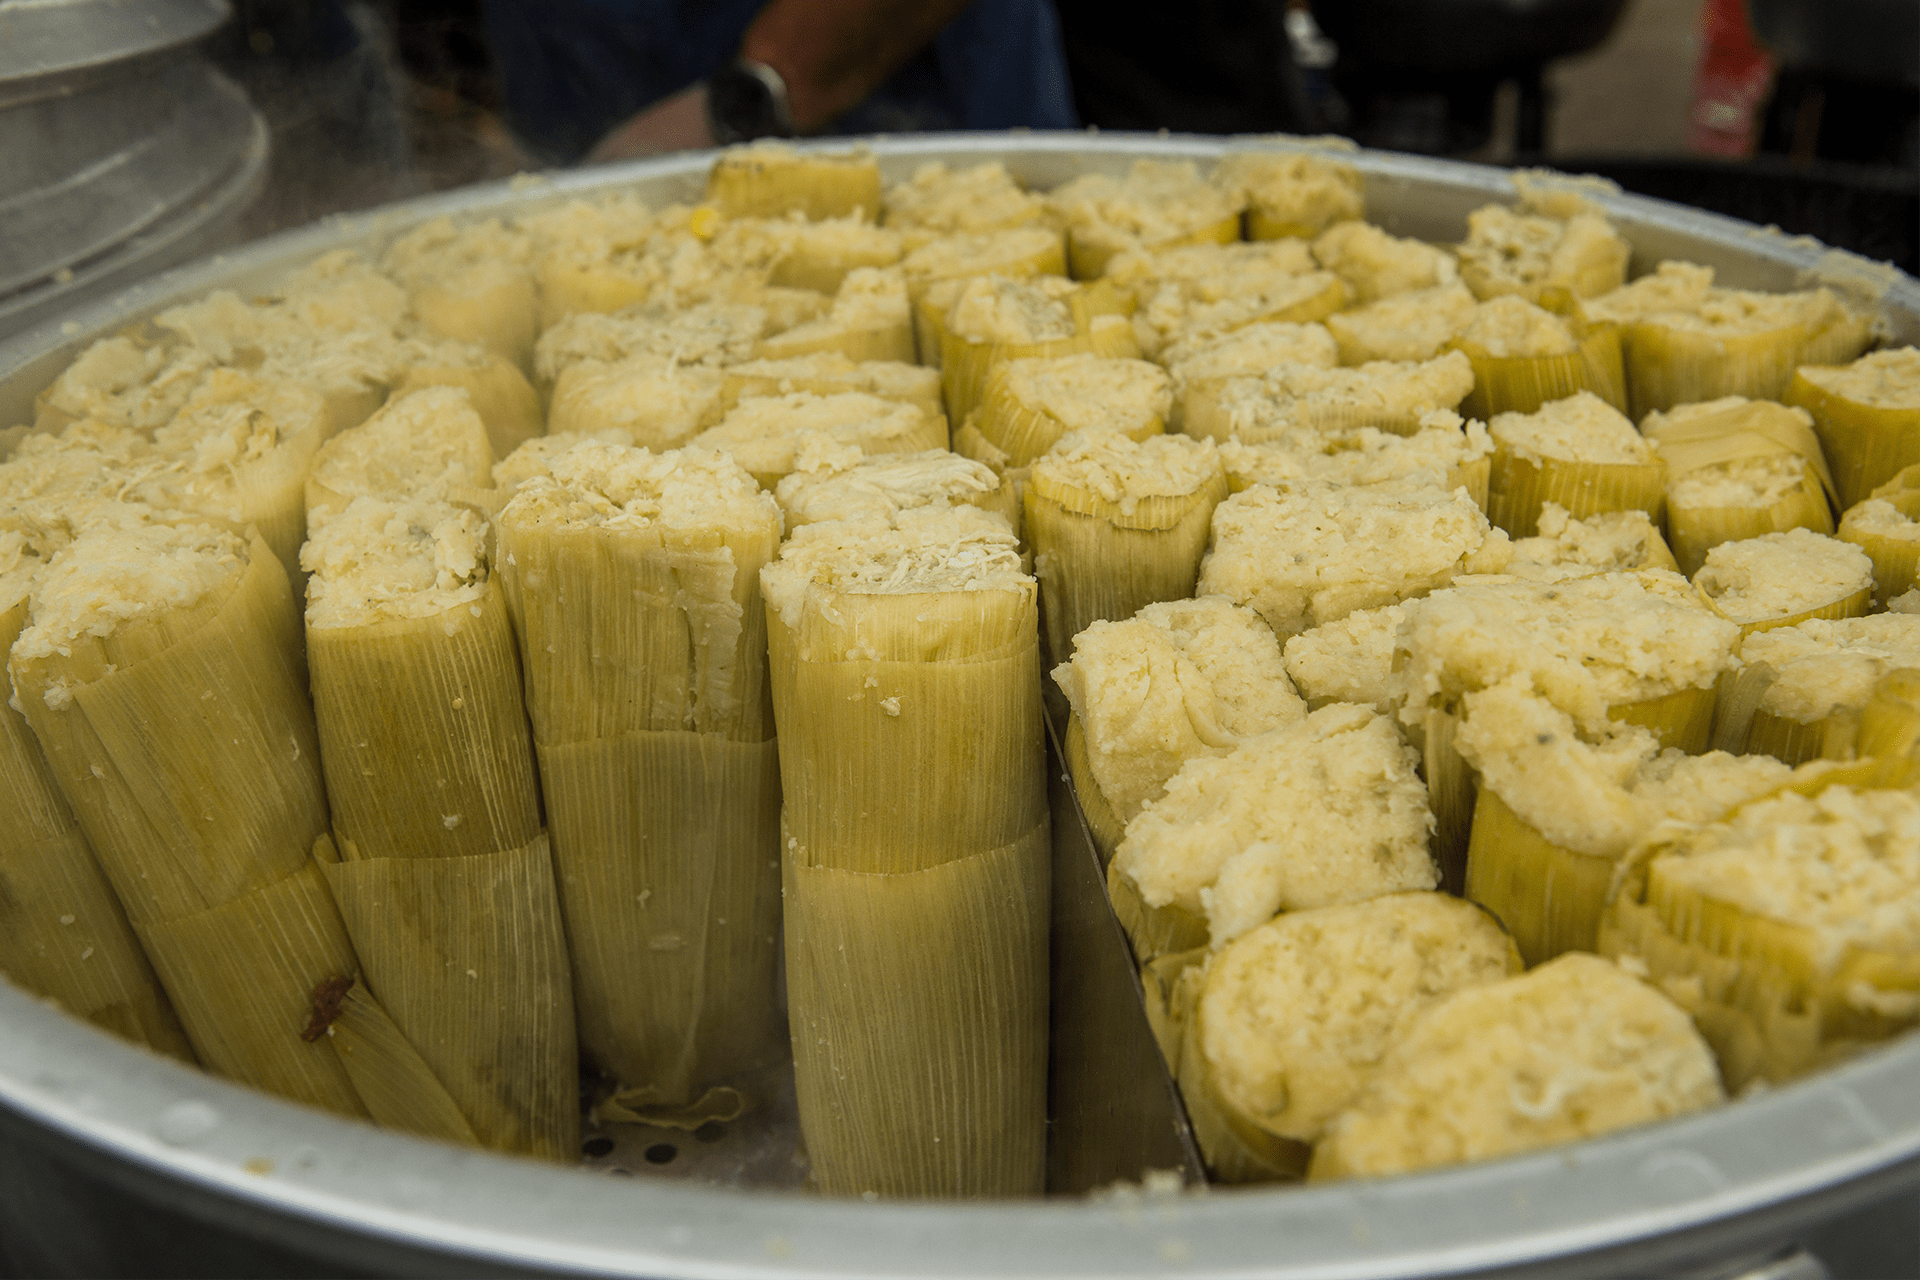 Image of numerous tamales stacked in a pot.